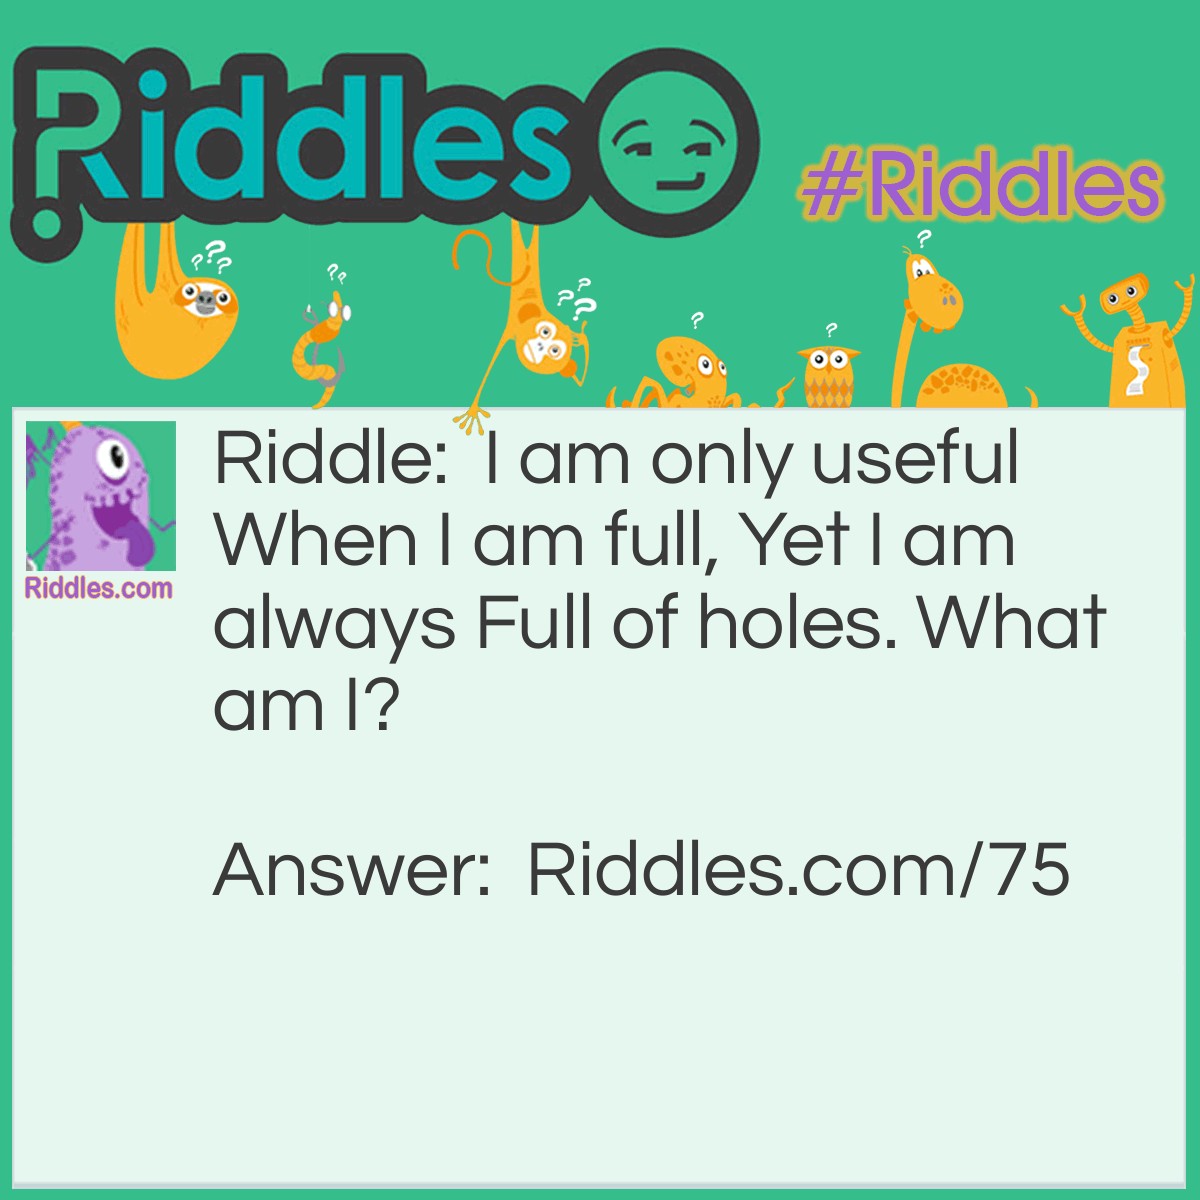 Riddle: I am only useful when I am full, yet I am always full of holes. What am I? Answer: I am a Sponge.